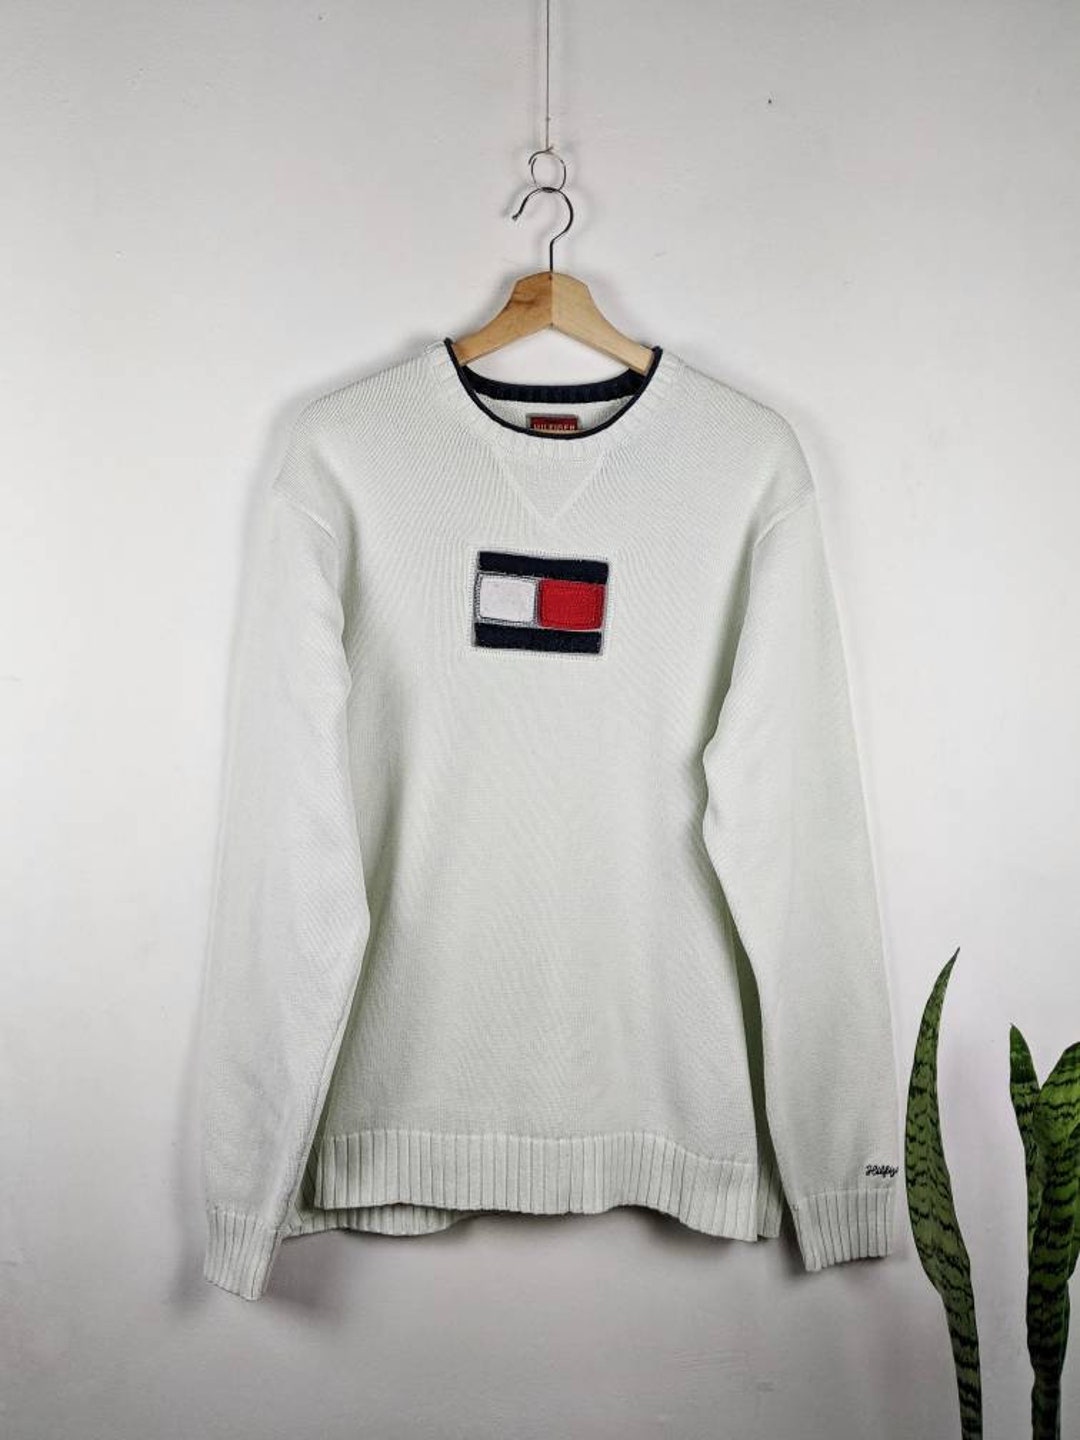 Tommy Hilfiger Sweater Crew Neck Made in Japan Big Logo - Etsy